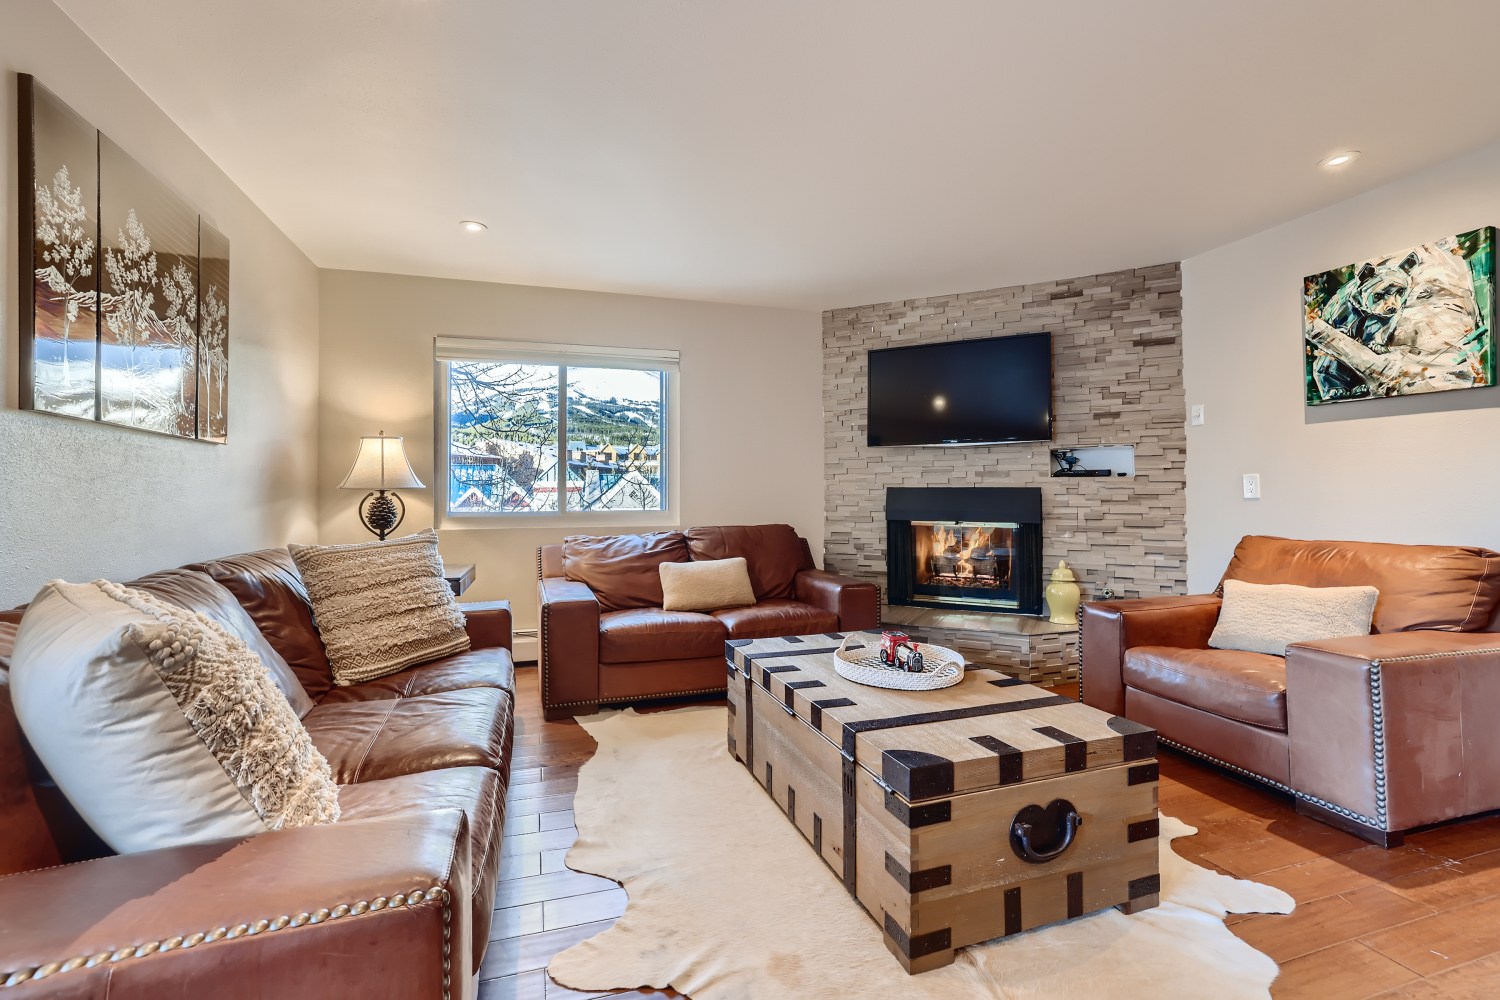 Open living space with fire place, and TV